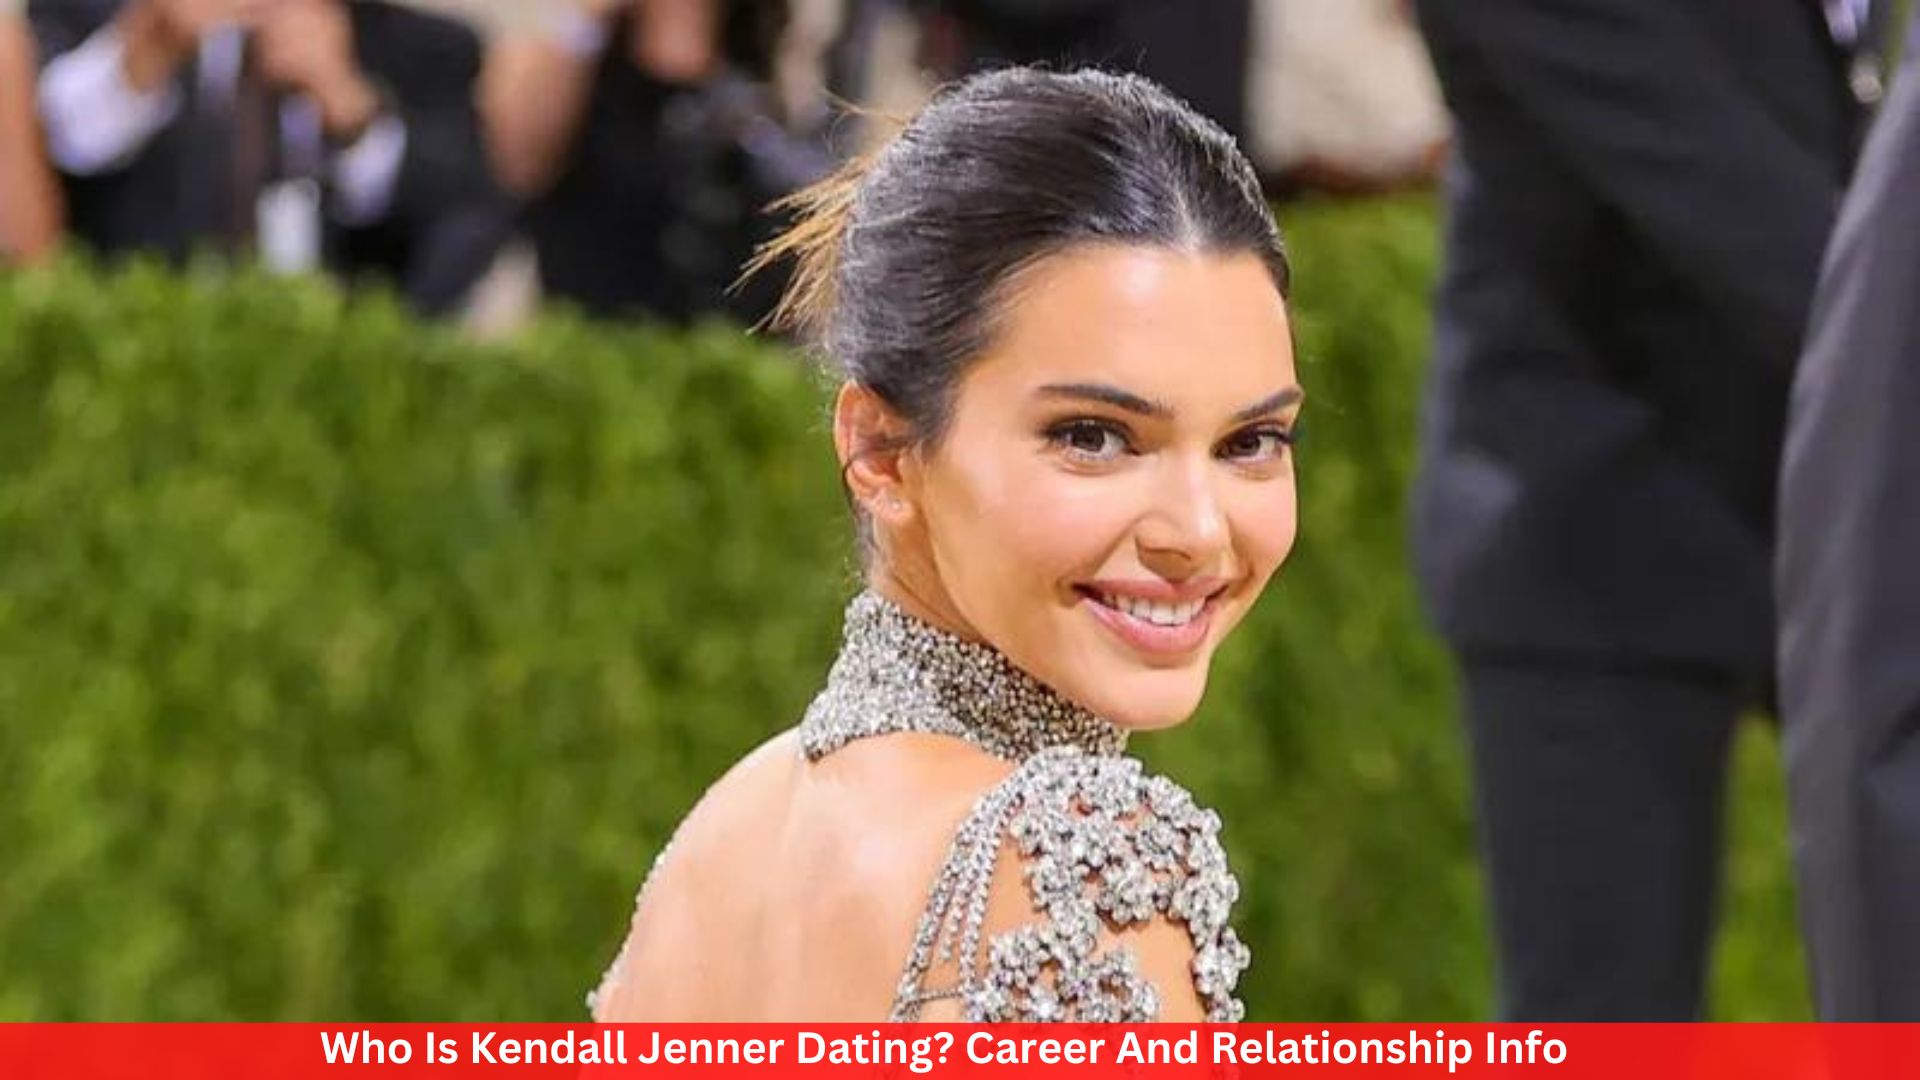 Who Is Kendall Jenner Dating? Career And Relationship Info